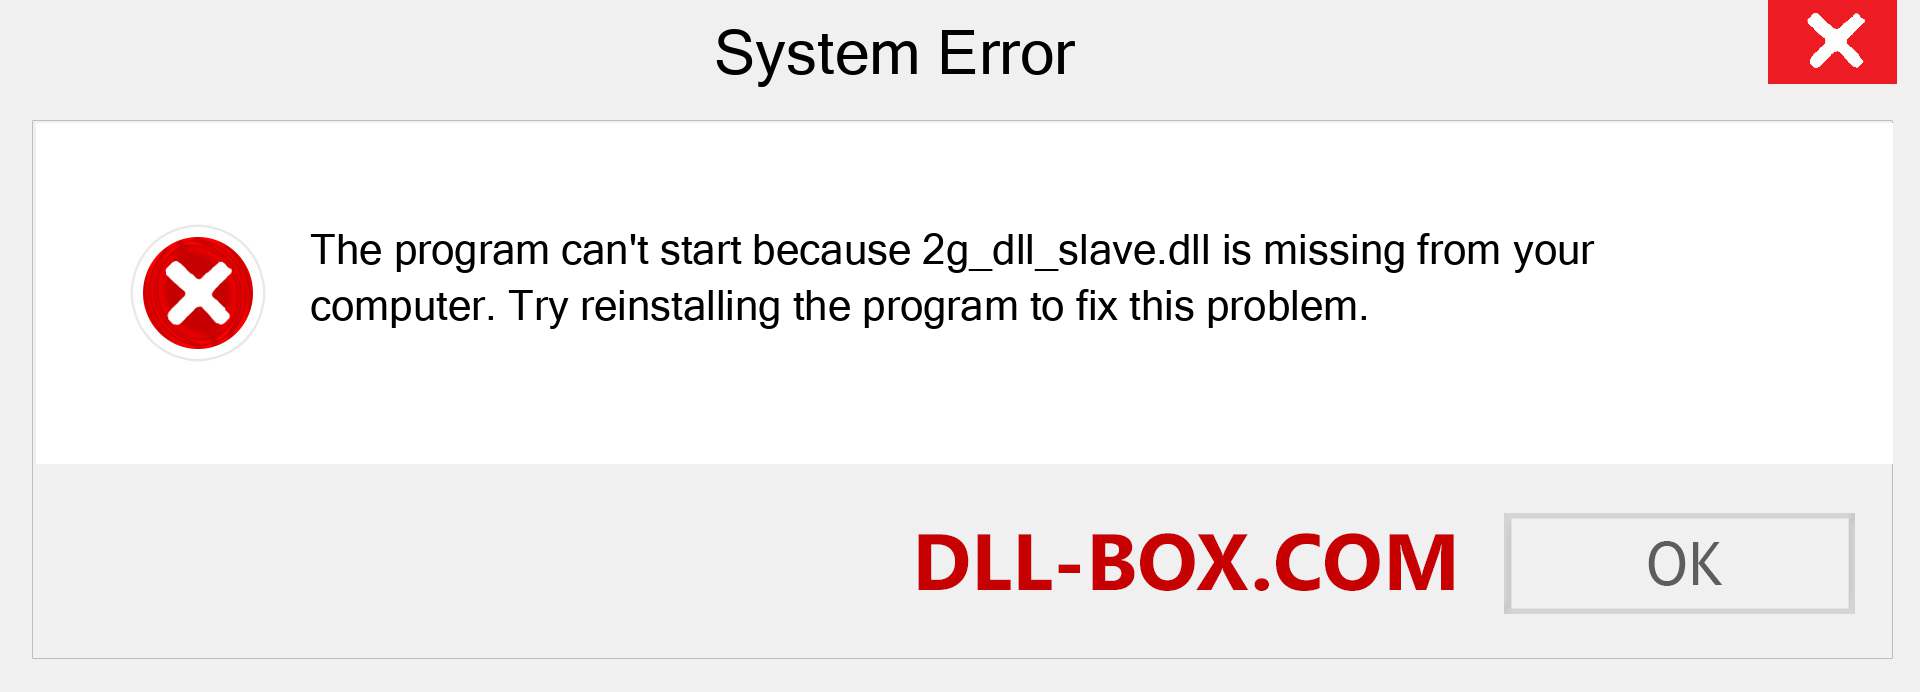  2g_dll_slave.dll file is missing?. Download for Windows 7, 8, 10 - Fix  2g_dll_slave dll Missing Error on Windows, photos, images